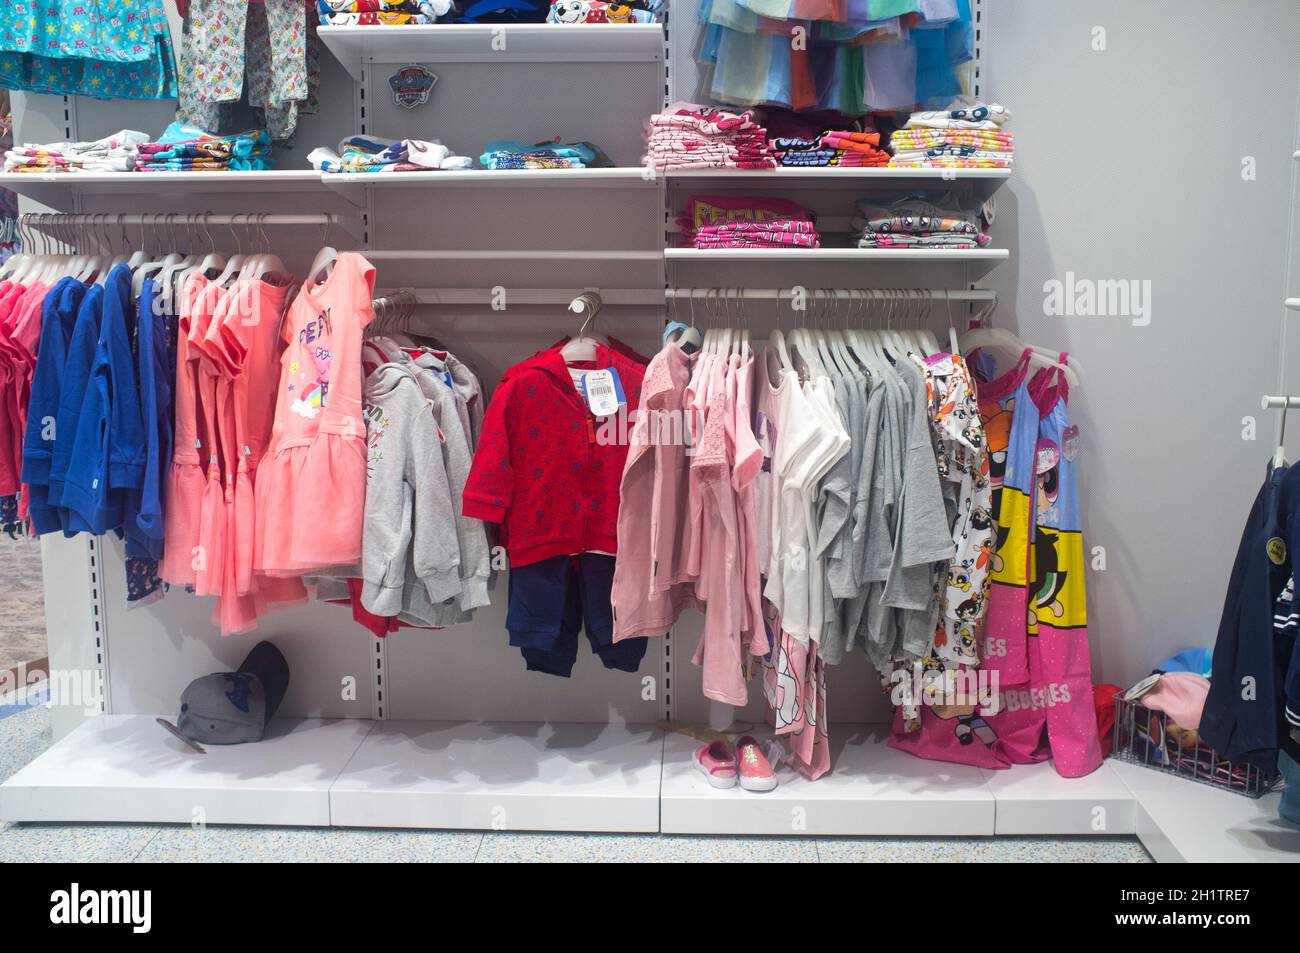 Spain, Badajoz - April 14th, 2018: Multicolored children clothing on the shelves of department store Stock Photo